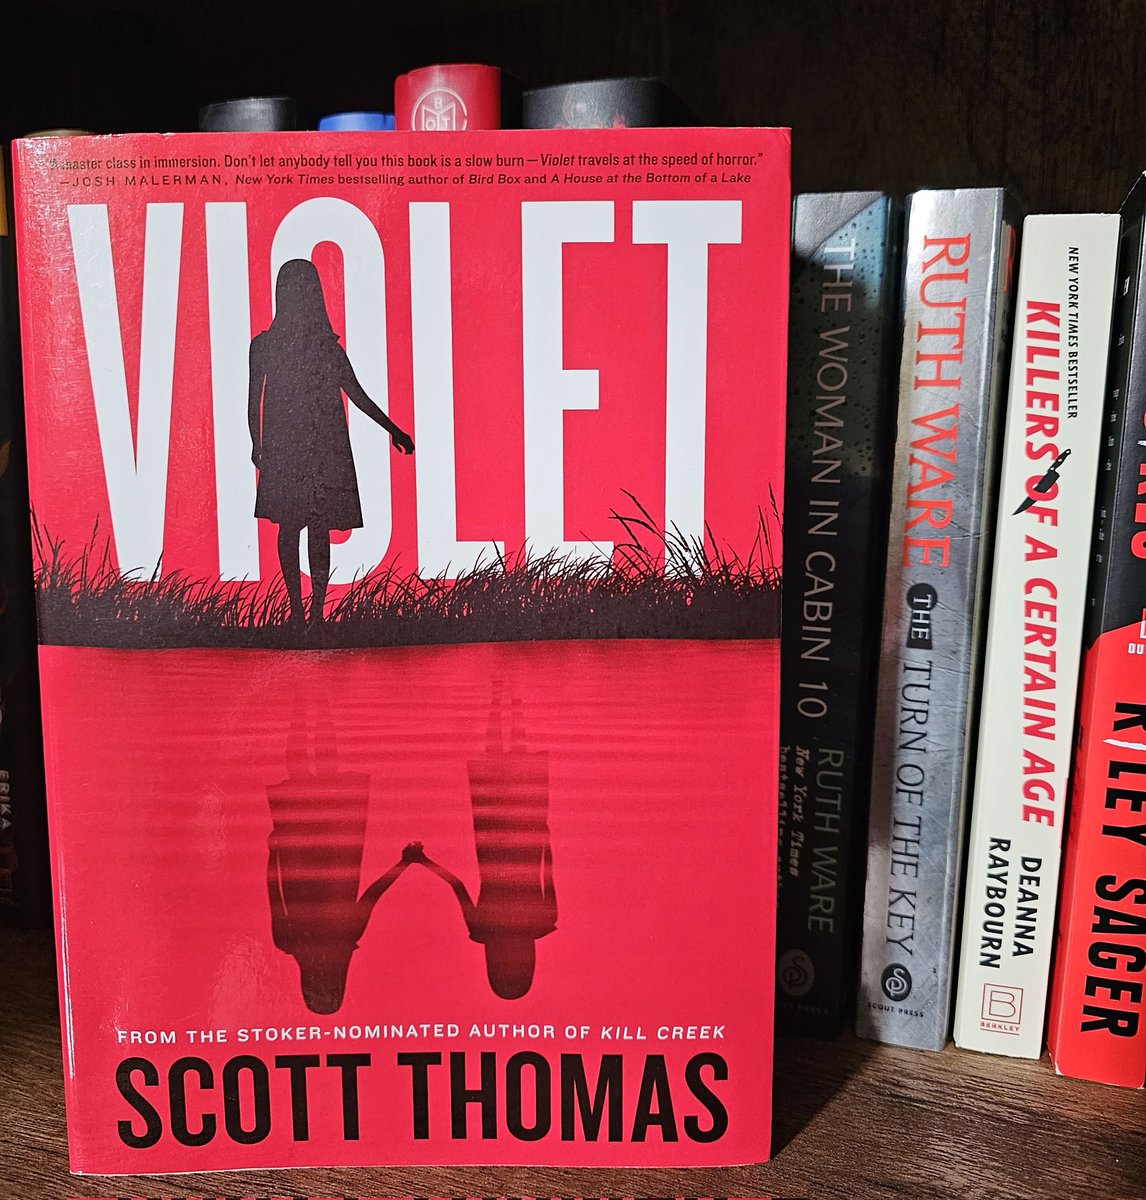 A great read by @ninjawhenever 
#Violet #BooksWorthReading #BookTwitter #suspense #thriller #ghoststory